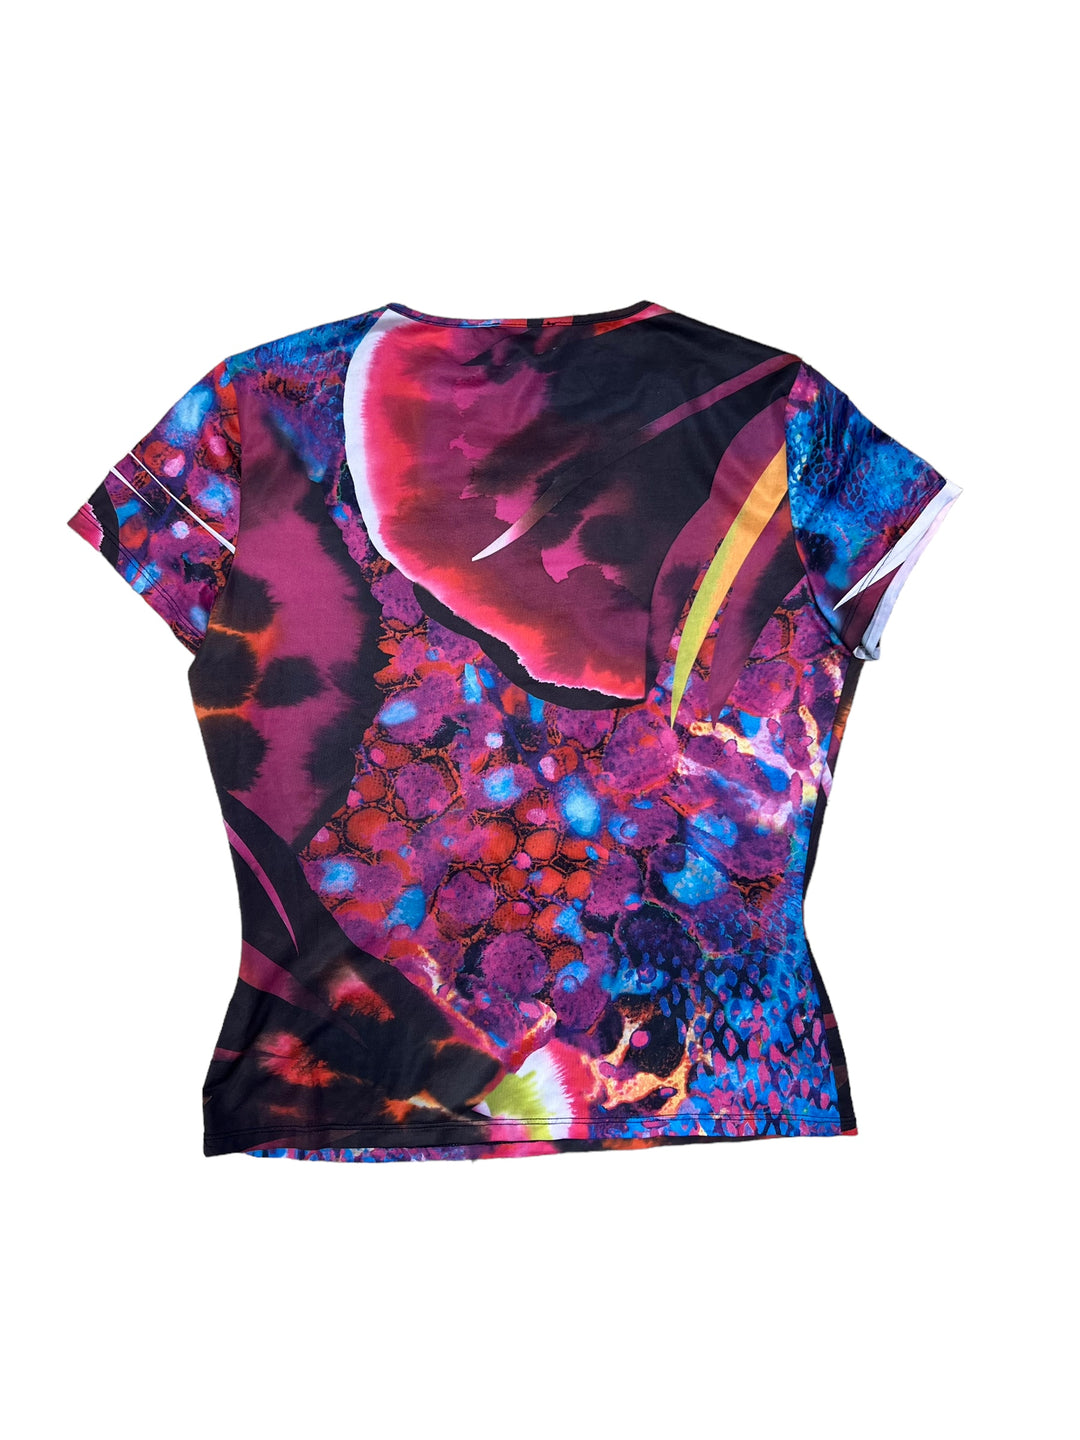 Y2K Nylon all over print top women’s large